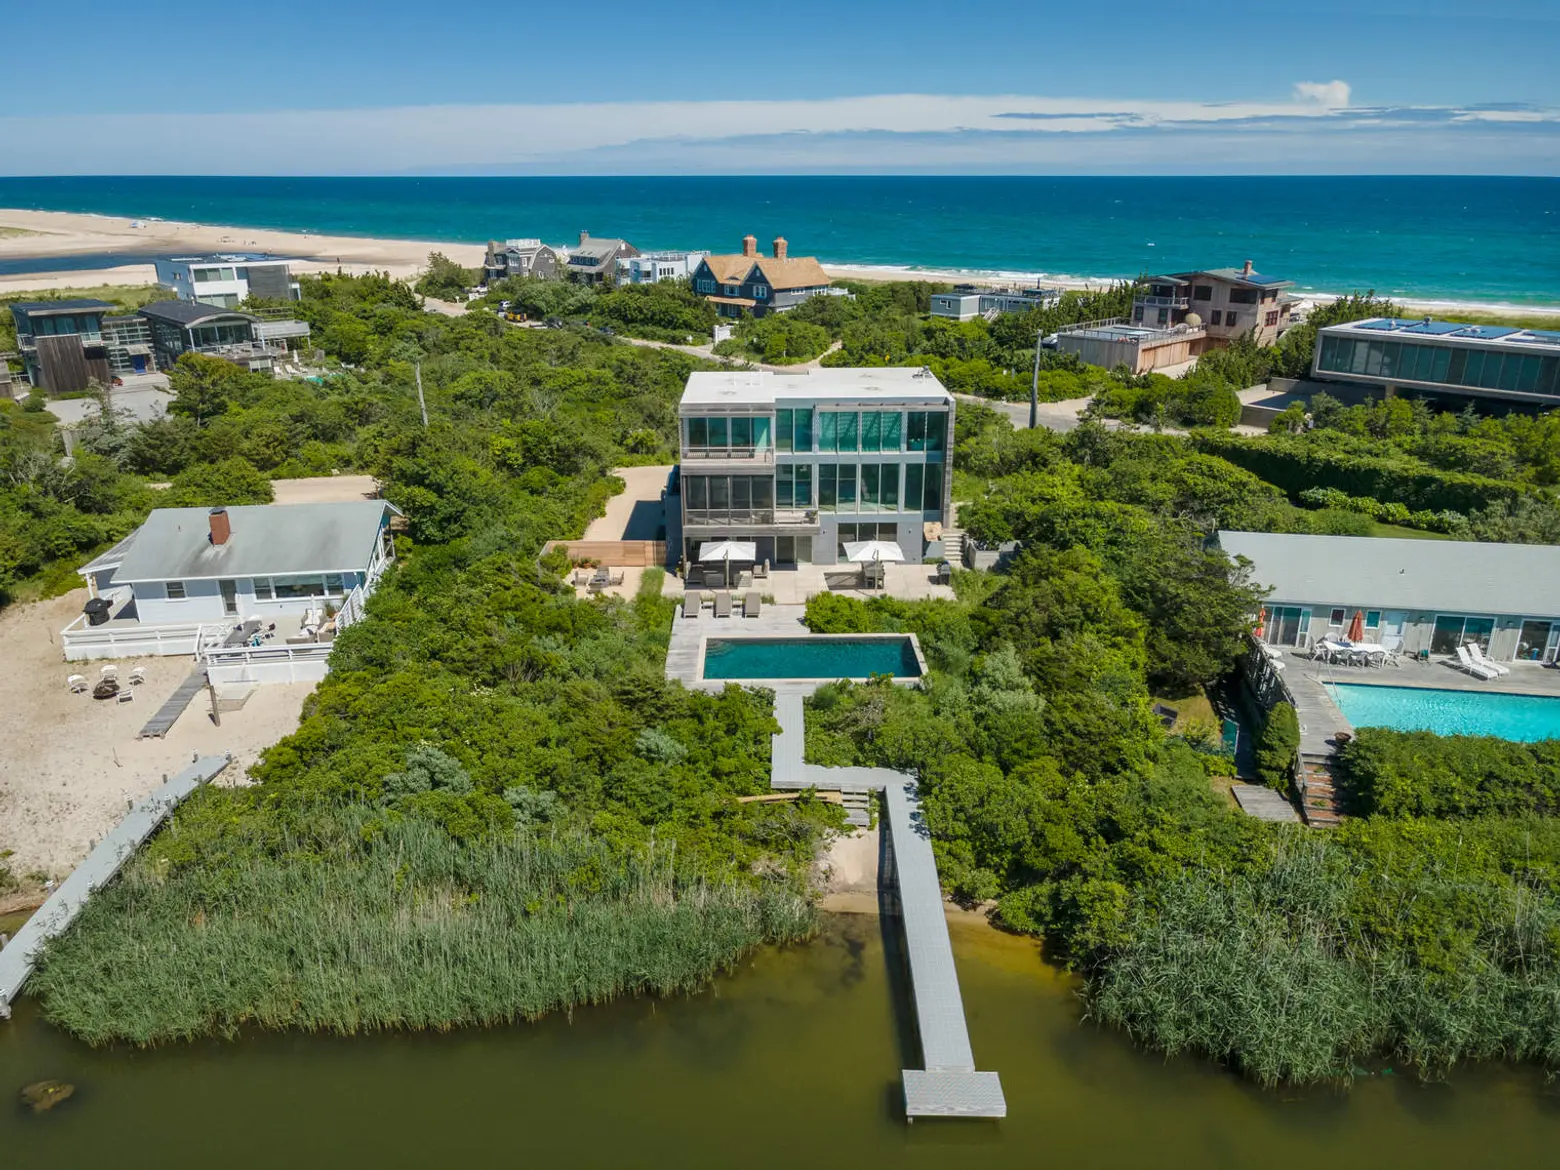 Asking $19.5M, this modern marvel in Water Mill was designed by a local Hamptons architect